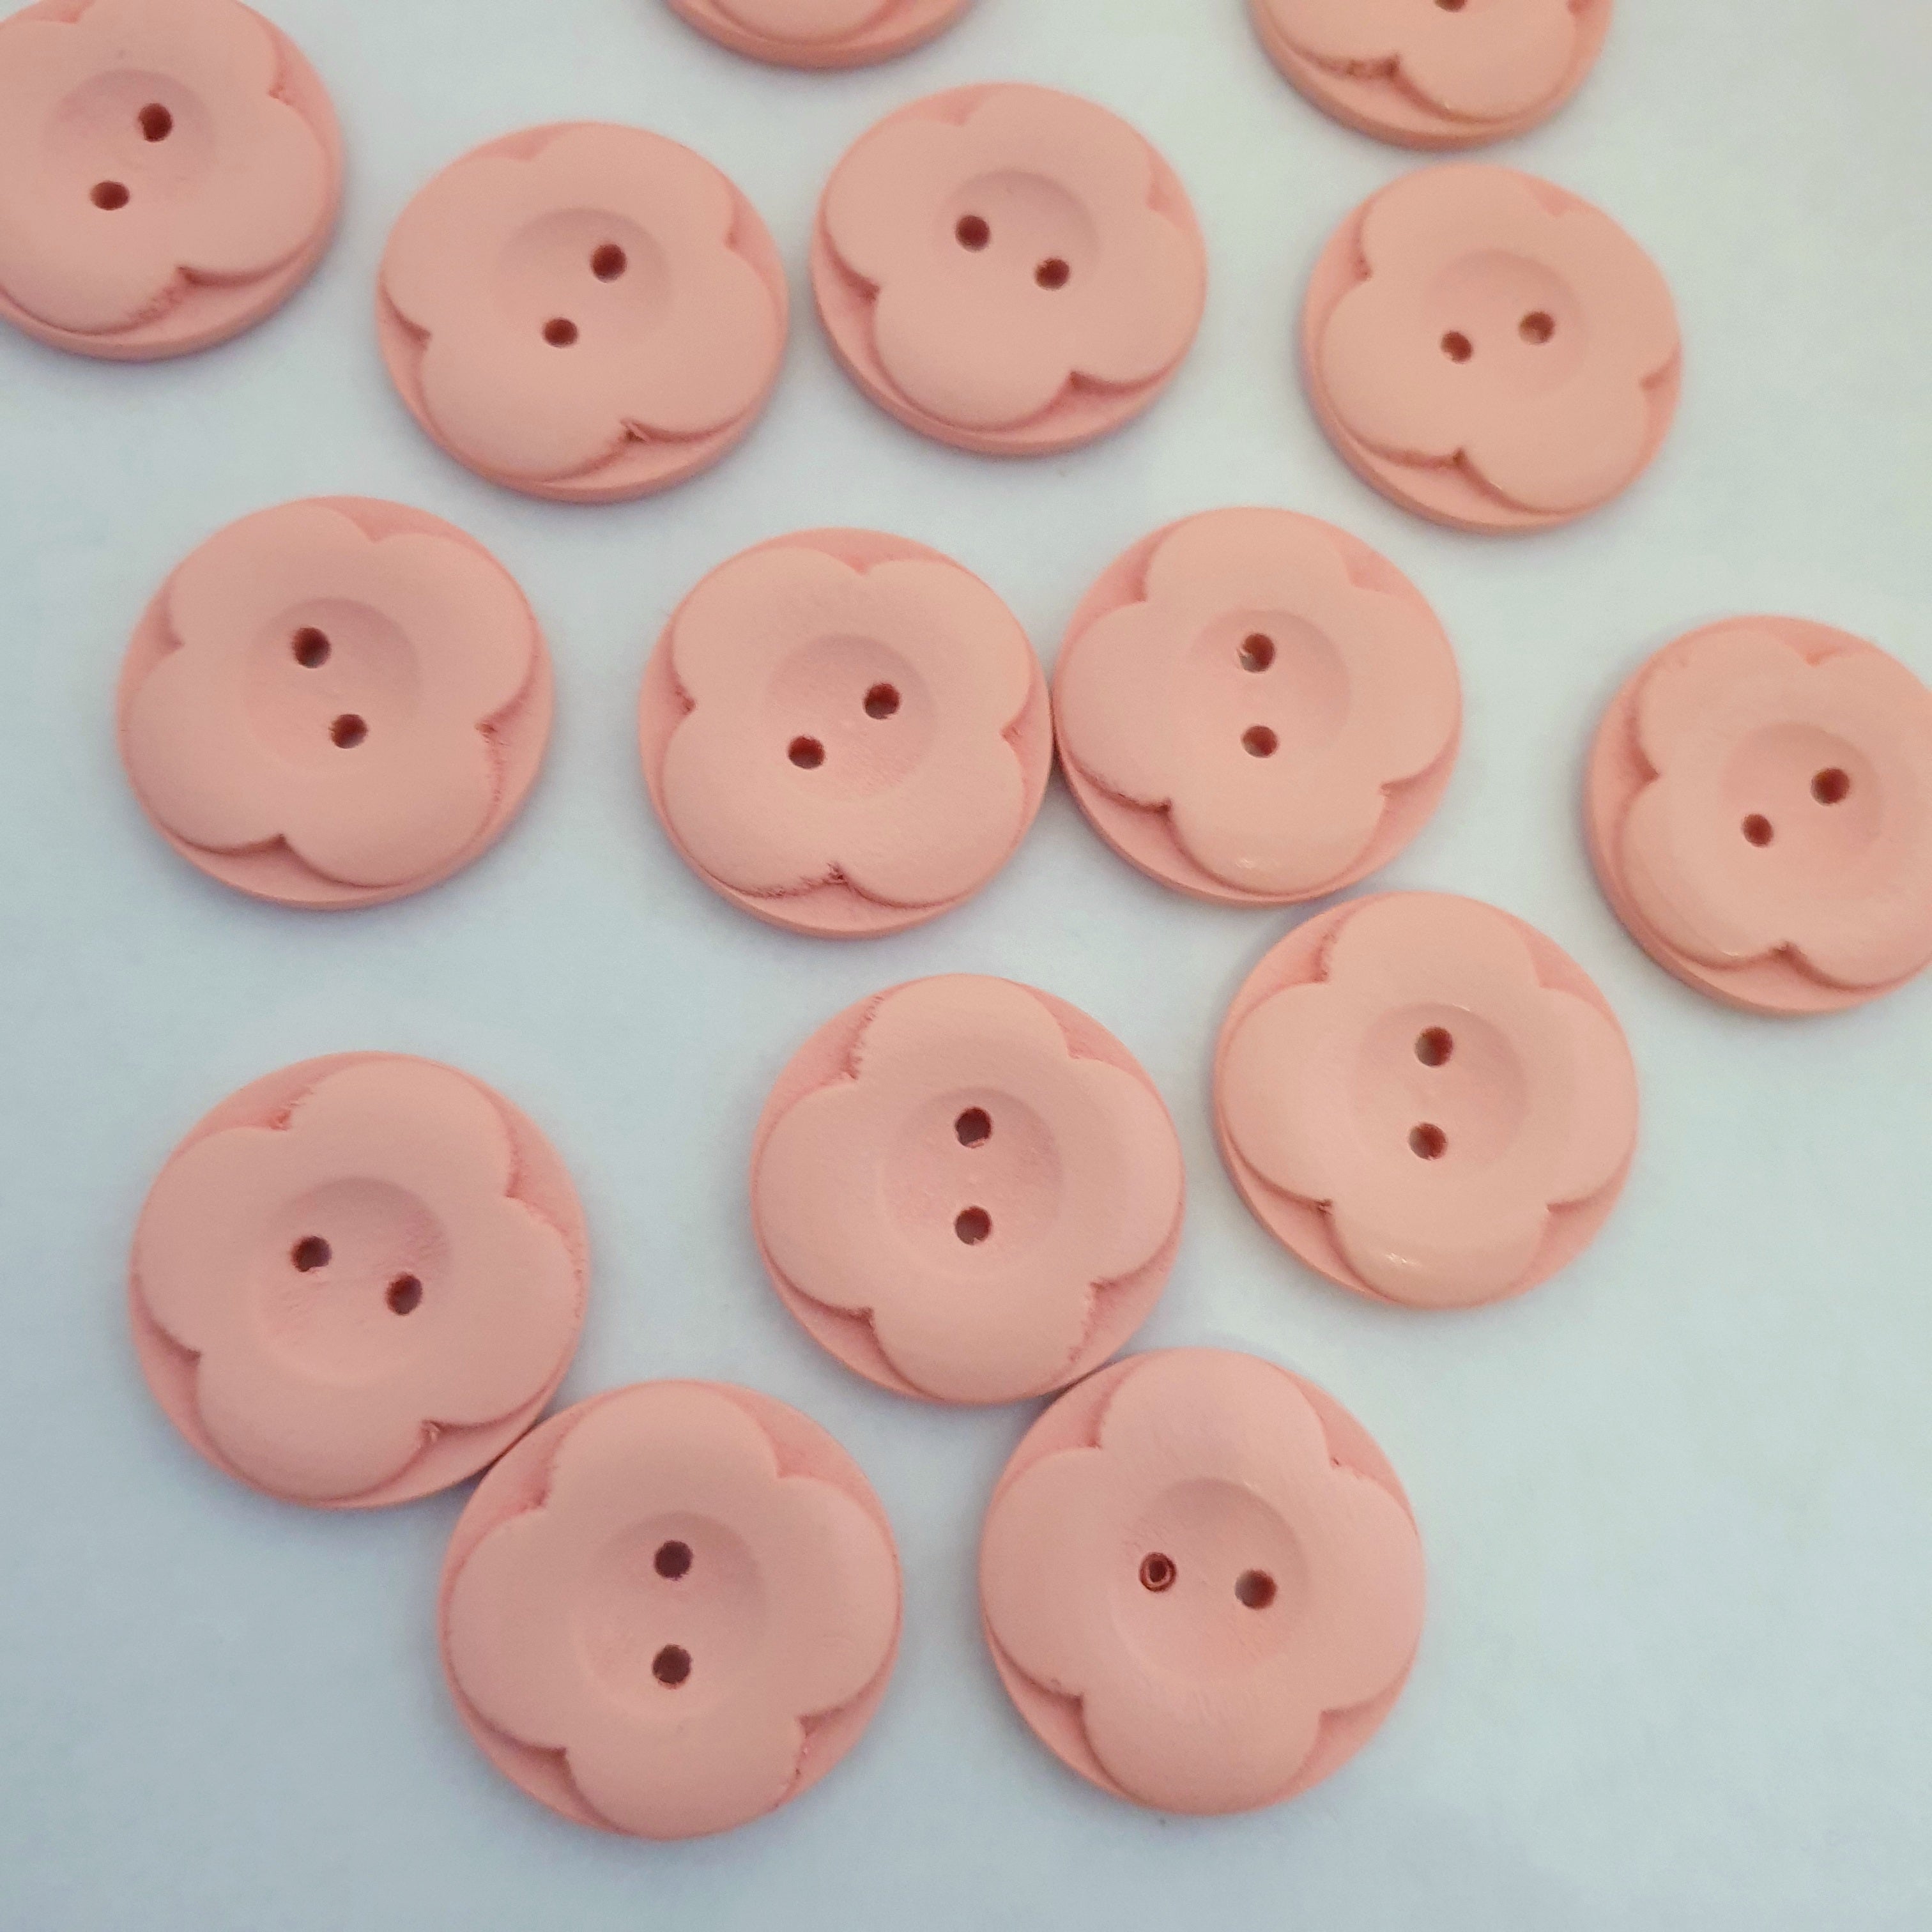 MajorCrafts 12pcs 25mm Blush Pink Carved Flower 2 Holes Round Wood Sewing Buttons